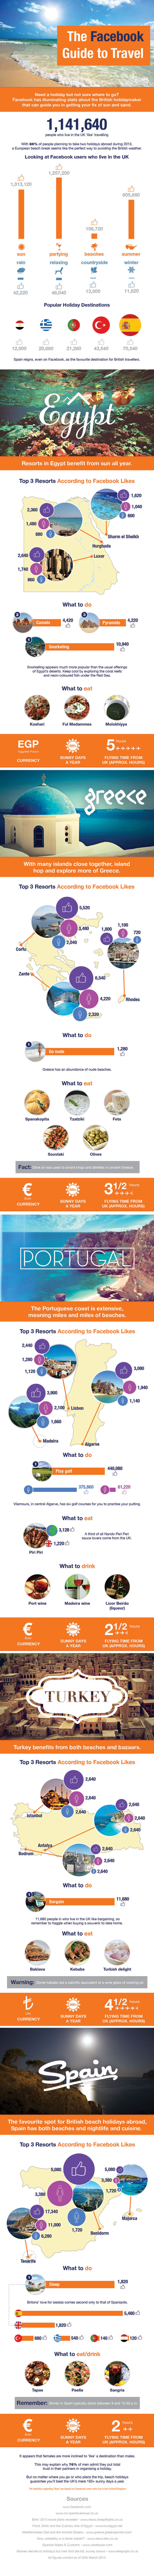 the-facebook-guide-to-travel